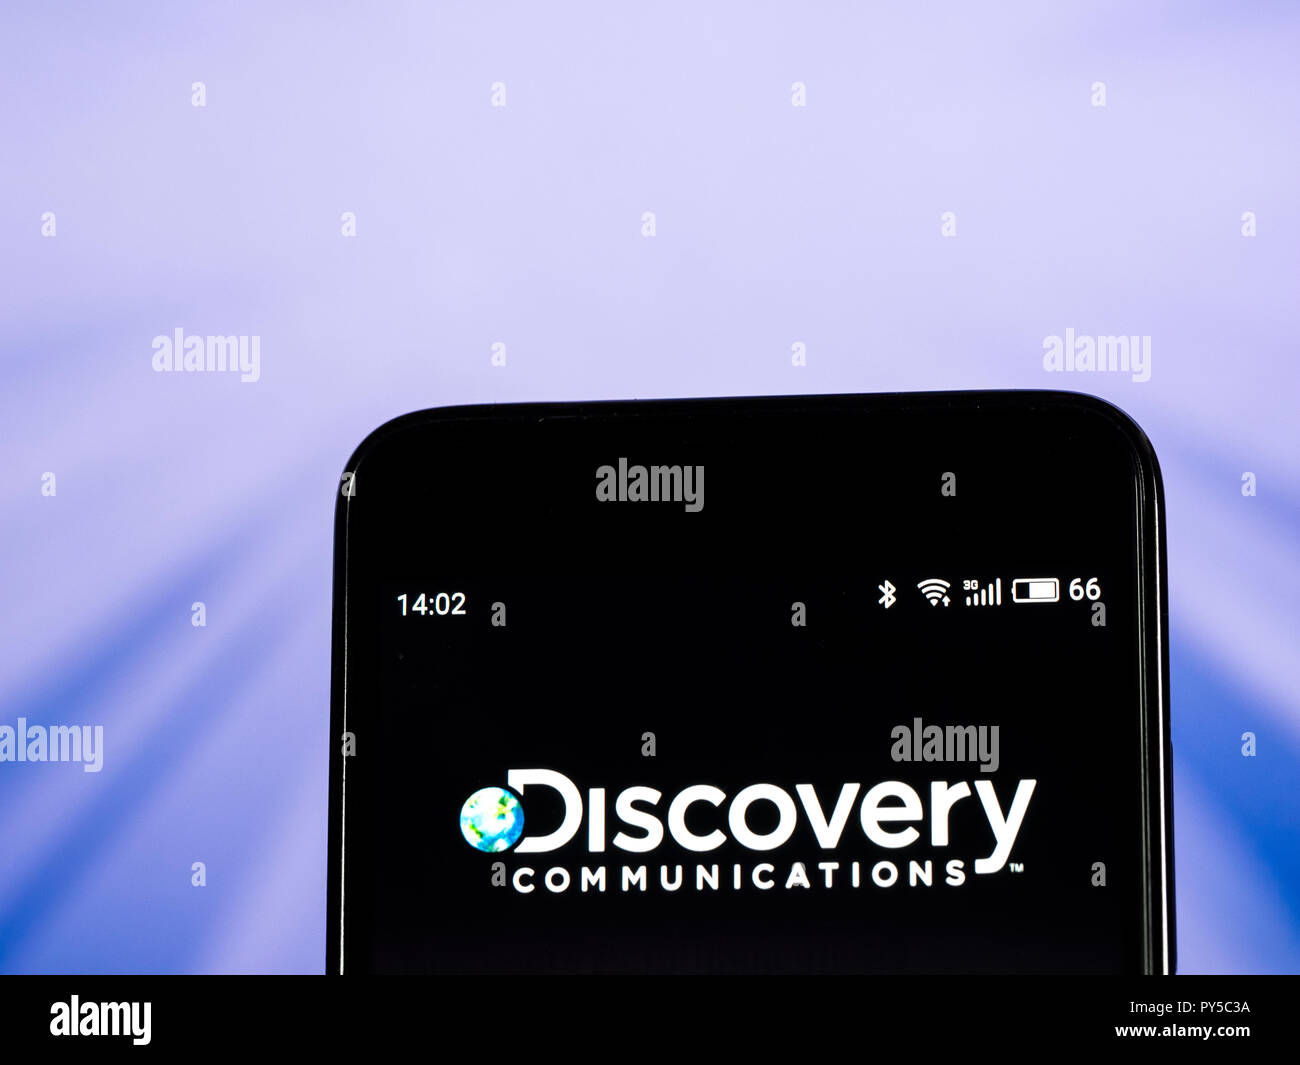 Discovery, Inc. Mass media company logo seen displayed on smart phone. Discovery, Inc. is an American mass media company primarily operates factual television networks, such as its namesake Discovery Channel, Animal Planet, Investigation Discovery, Science Channel, TLC, and other spin-off brands. Stock Photo